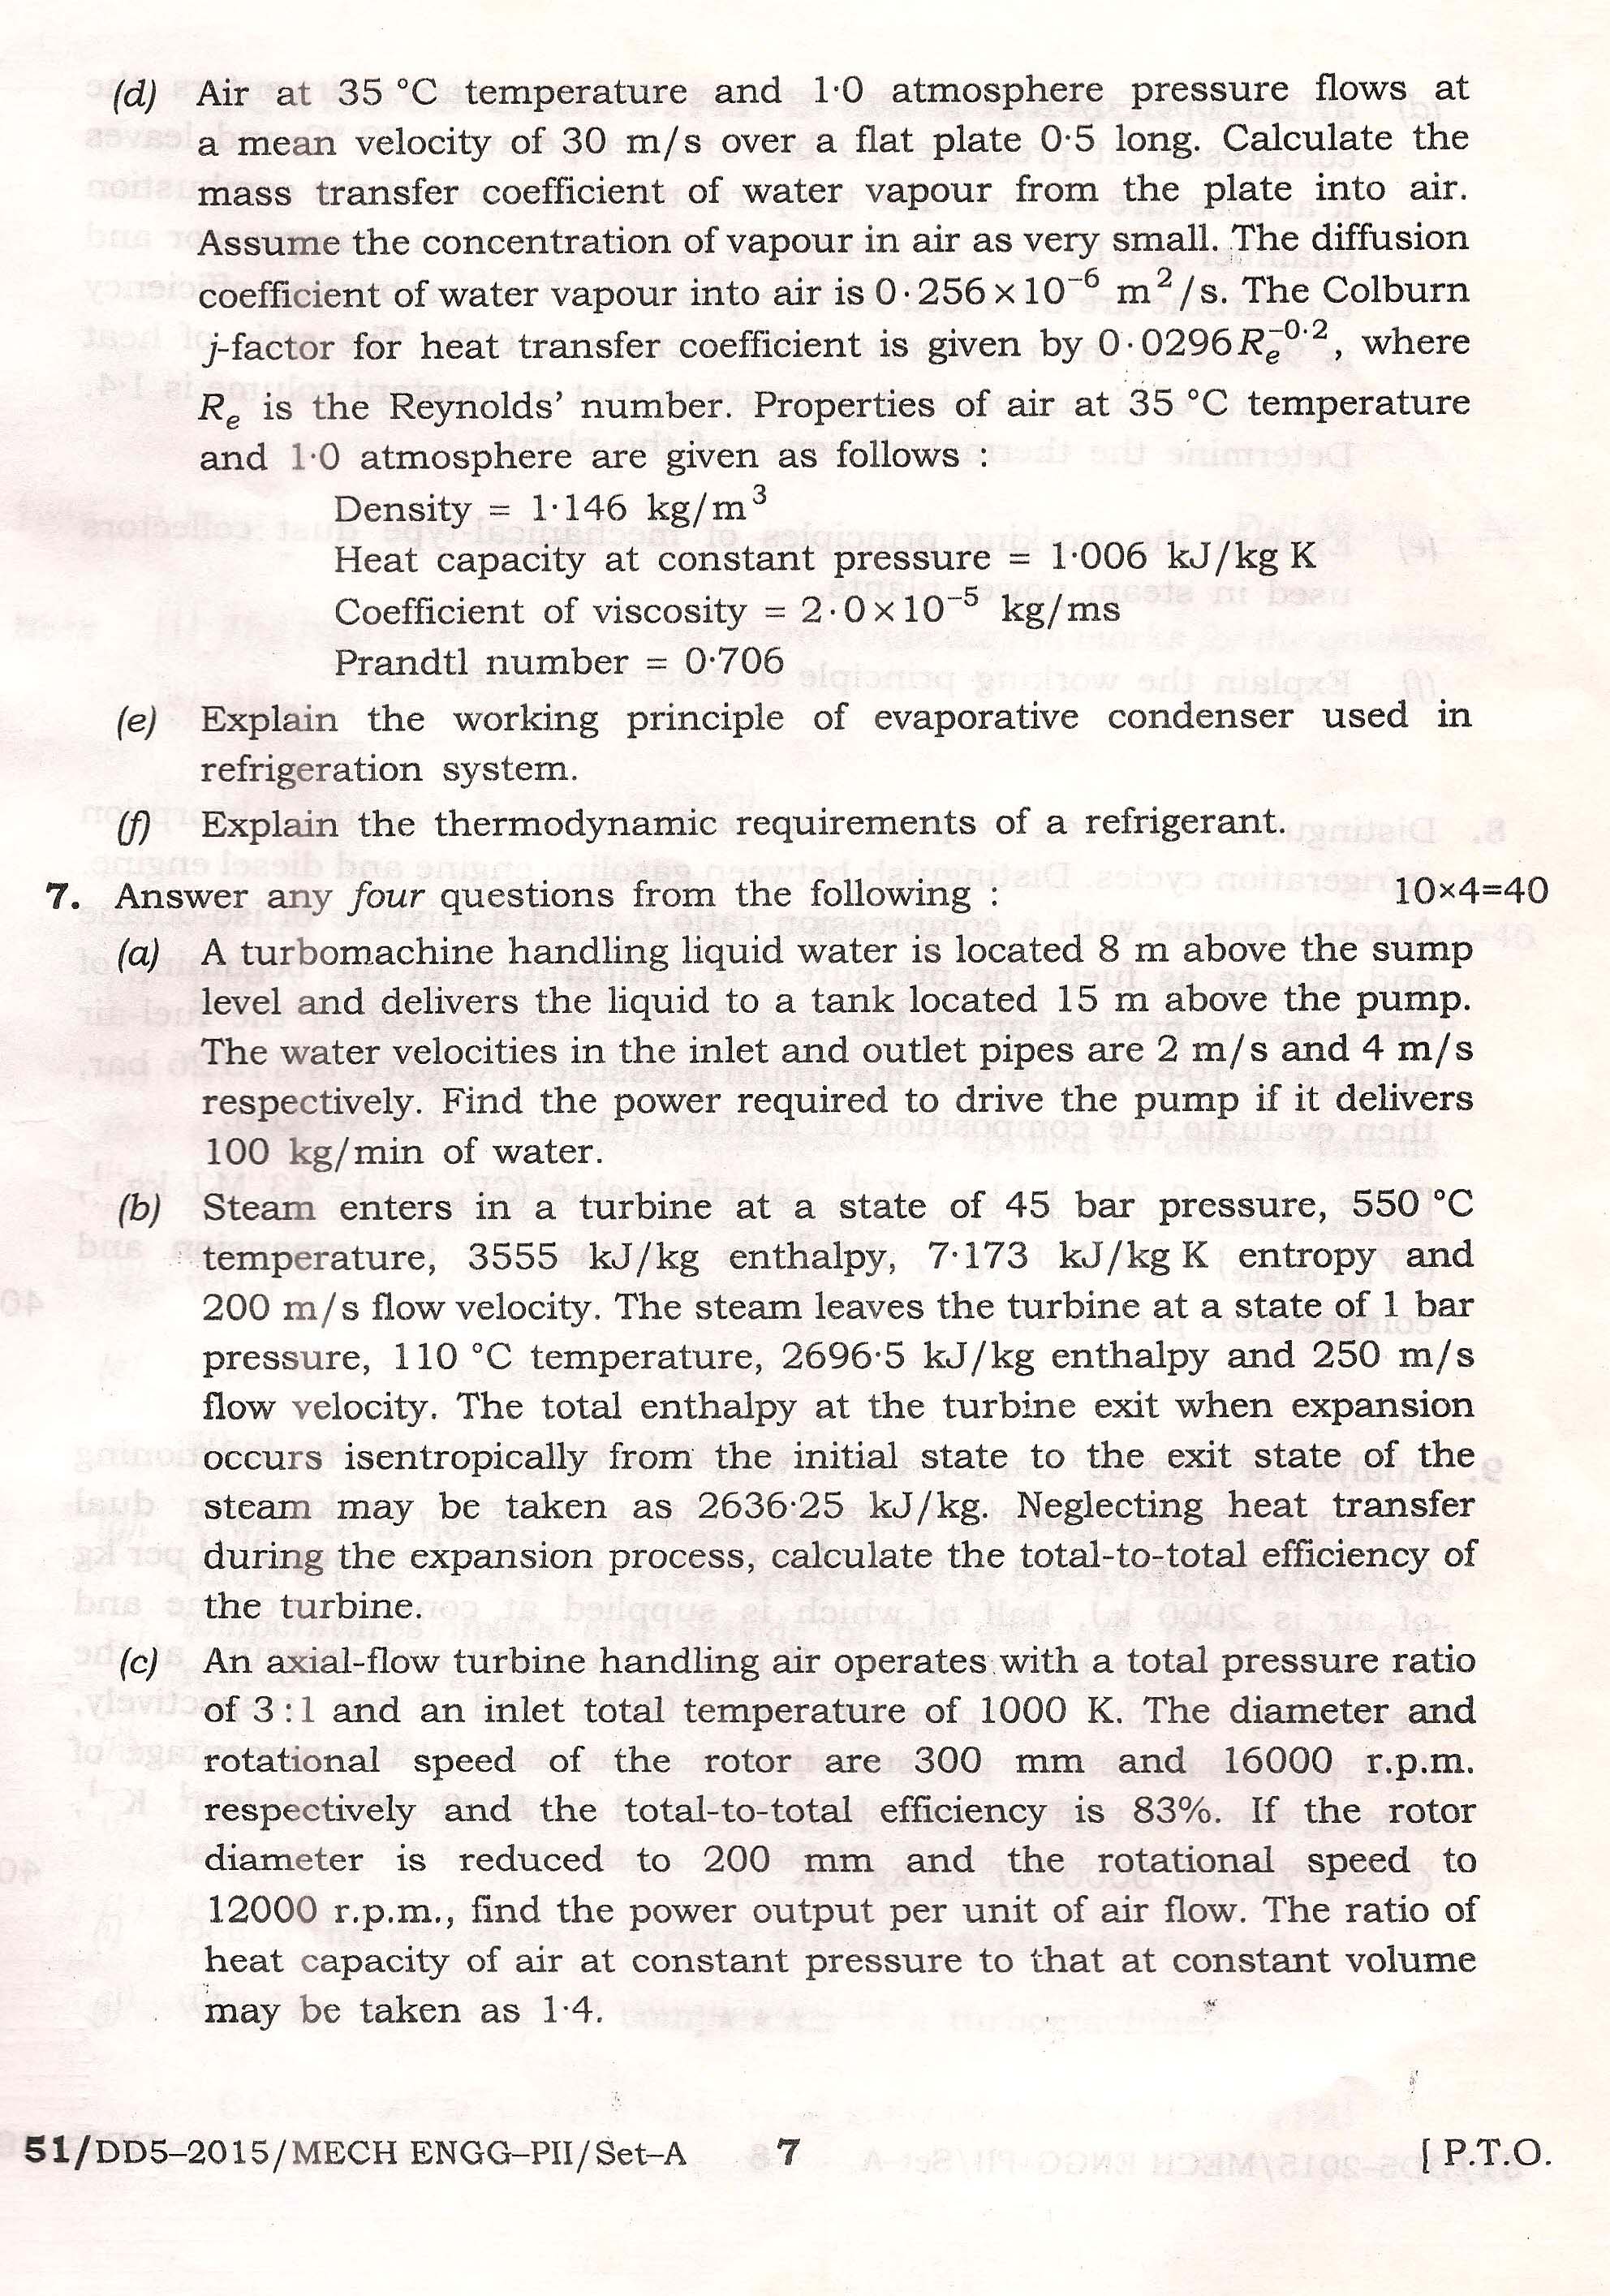 APPSC Combined Competitive Main Exam 2015 Mechanical Engineering Paper II 7